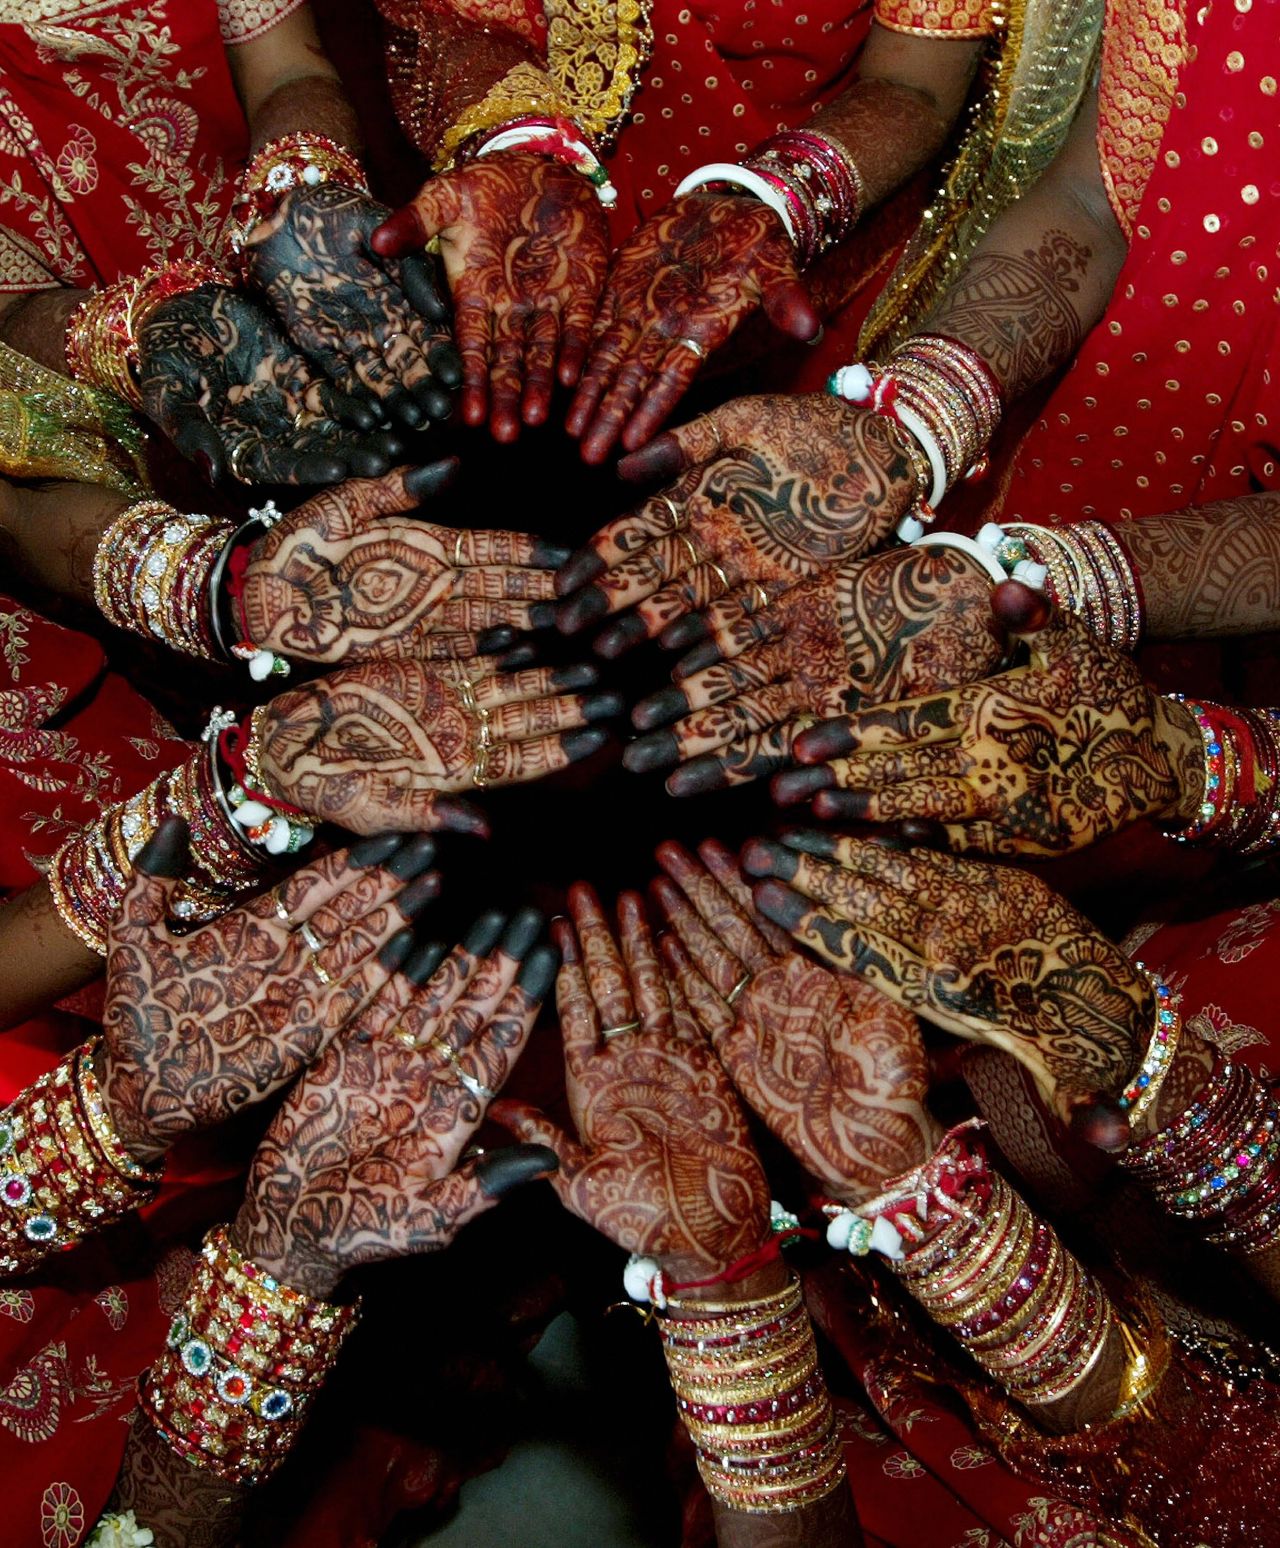 Indian brides display their hands, which have been decorated with henna in traditional bridal patterns, ahead of a multi-religious mass marriage in Bavla, Gujarat. 